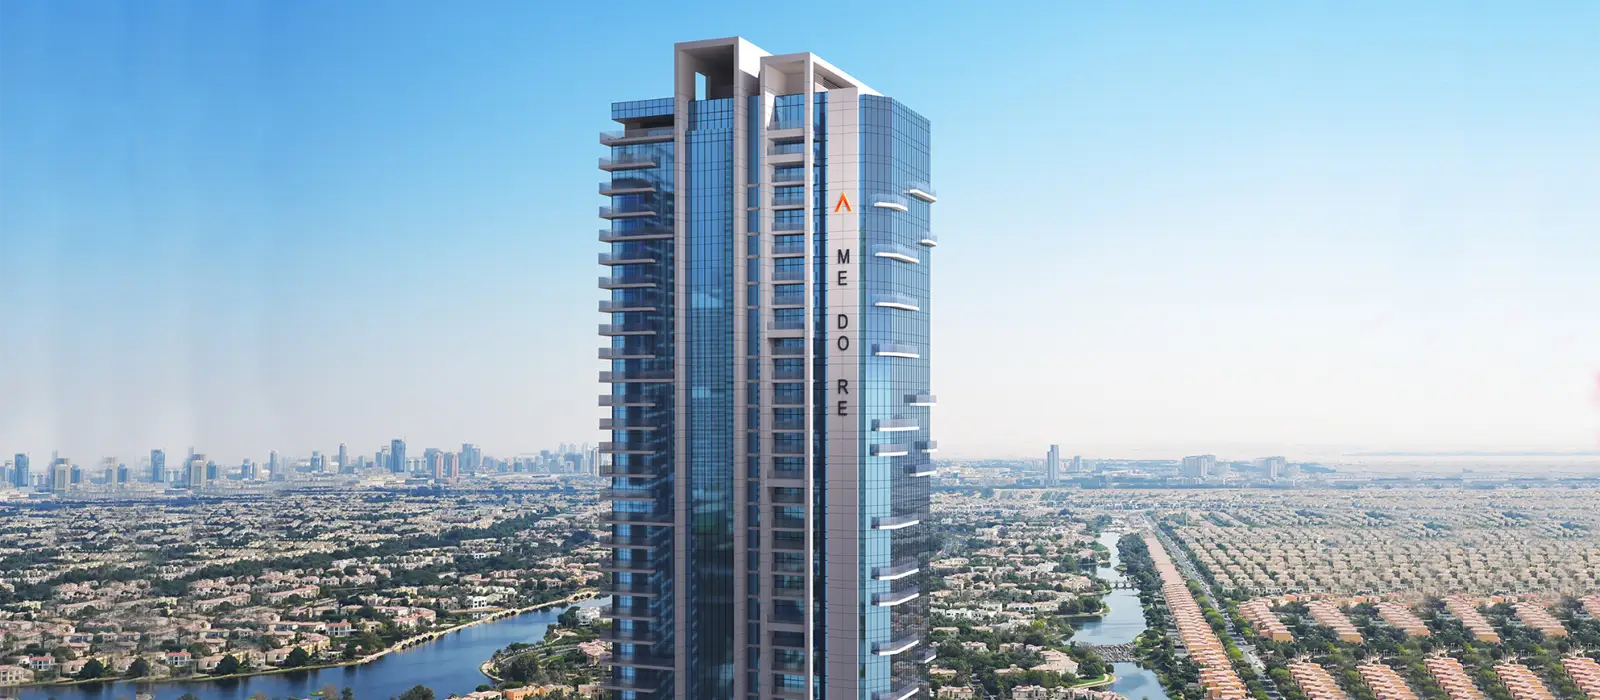 Luxury Residences at Me Do Re Tower